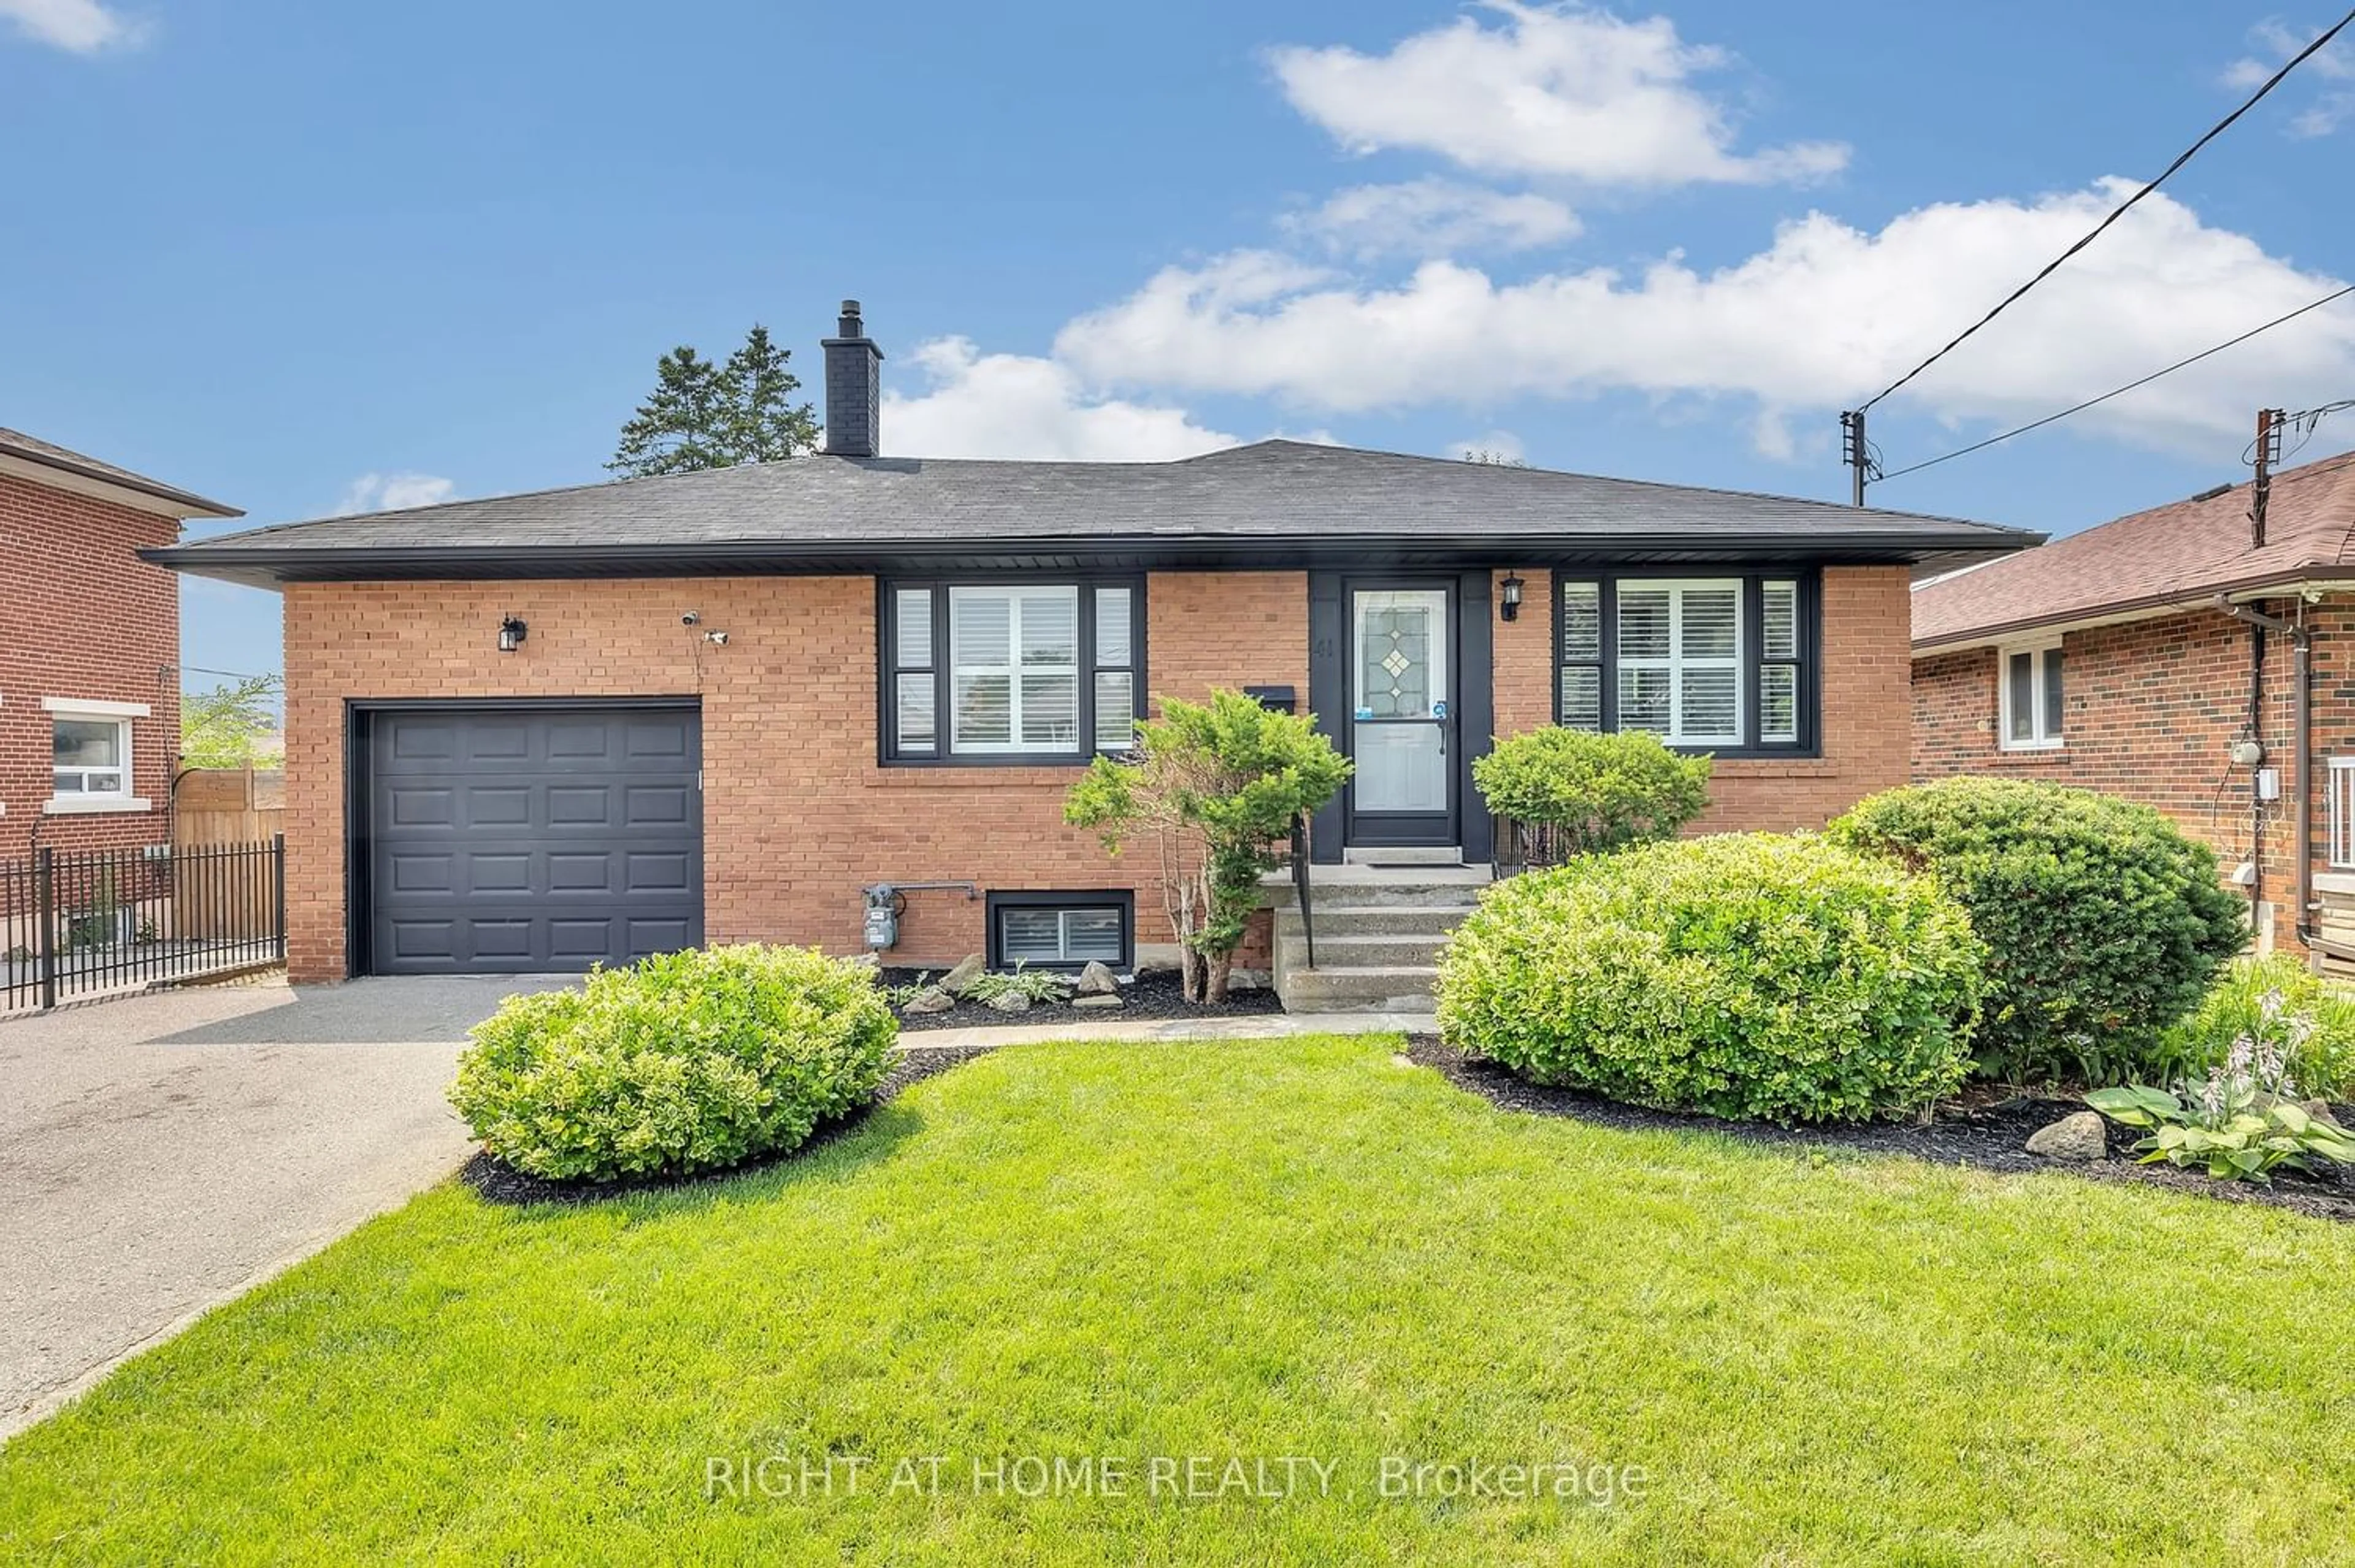 Home with brick exterior material for 41 Beckett Ave, Toronto Ontario M6L 2B3